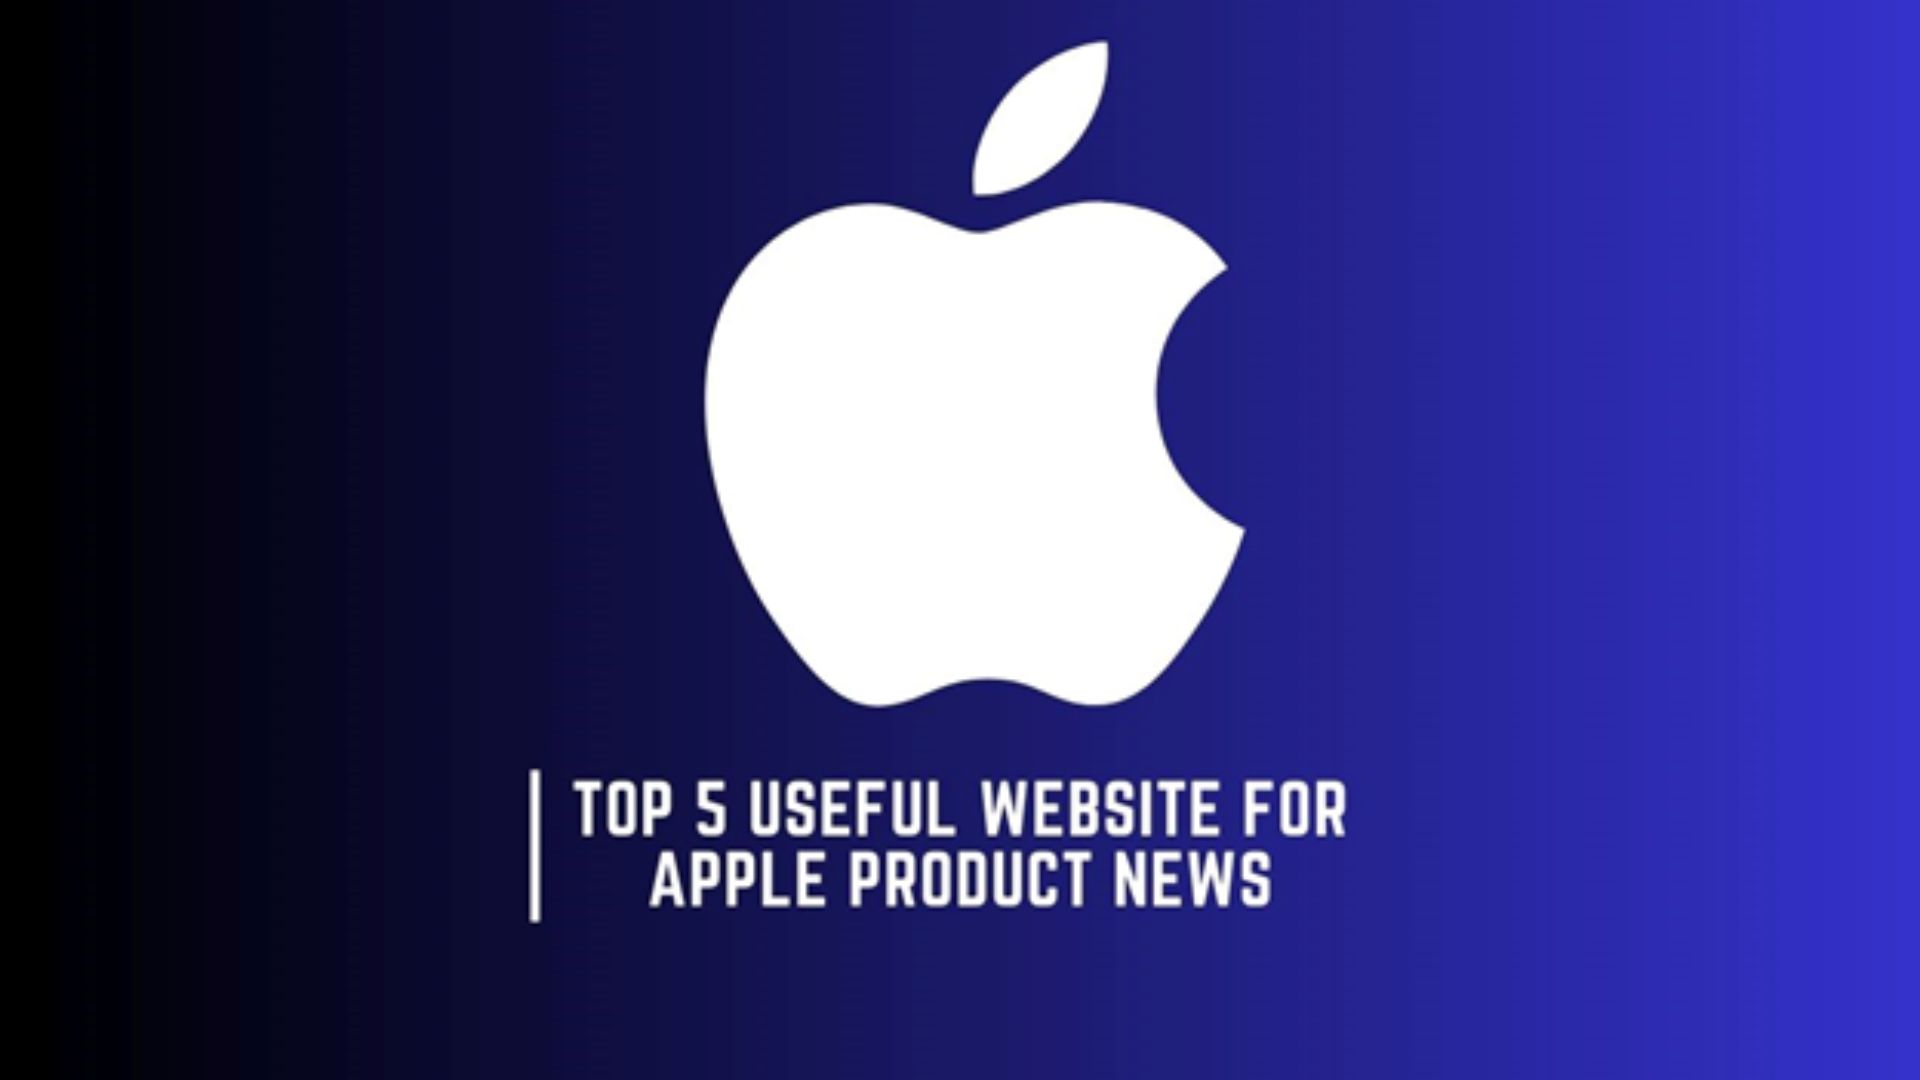 Stay Up-to-Date with the Latest Apple Product News: Top 5 Reliable Websites to Follow